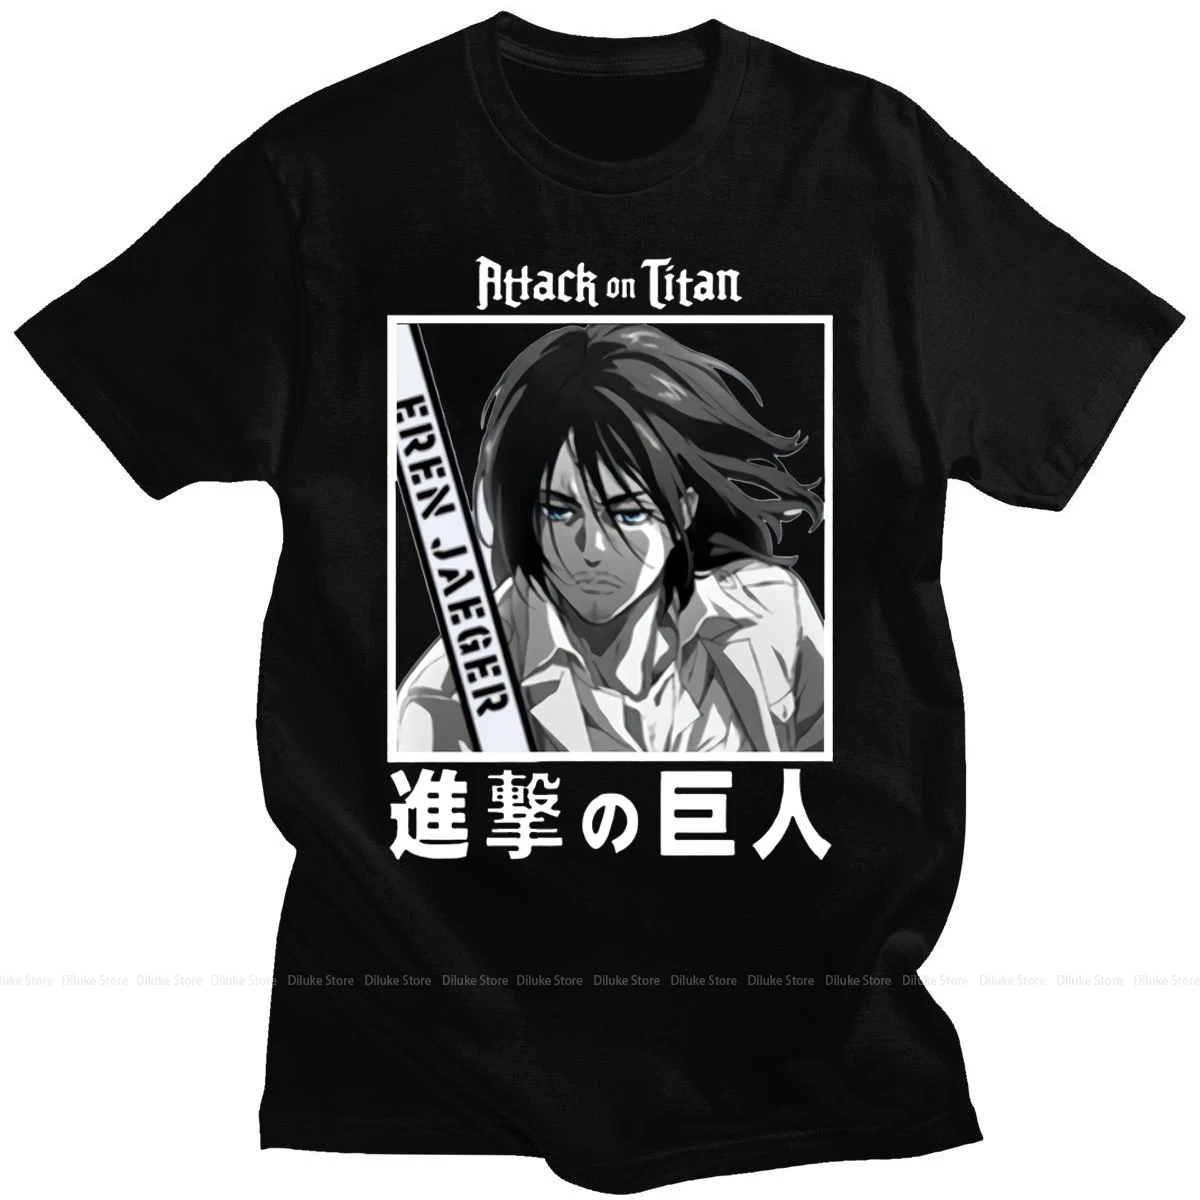 

2021 New Japanese Anime Attack on Titan Tshirt Super Cool Eren Jager Print Short Sleeve Male Casual Loose Hipster T-shirt Tops